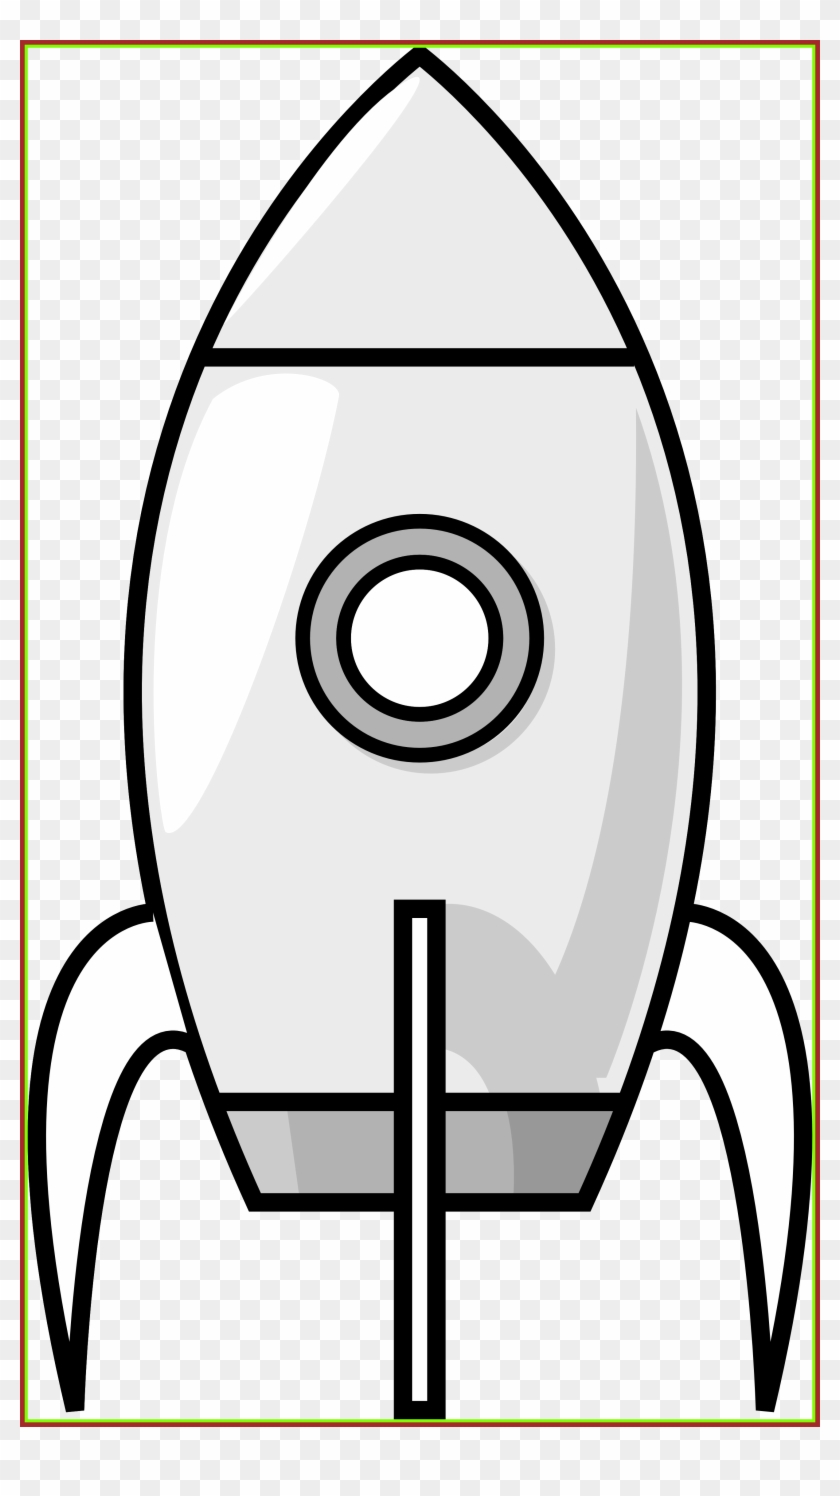 Appealing Rocket Clipart Black And White Panda For - Rocket Cartoon Black And White #1303434